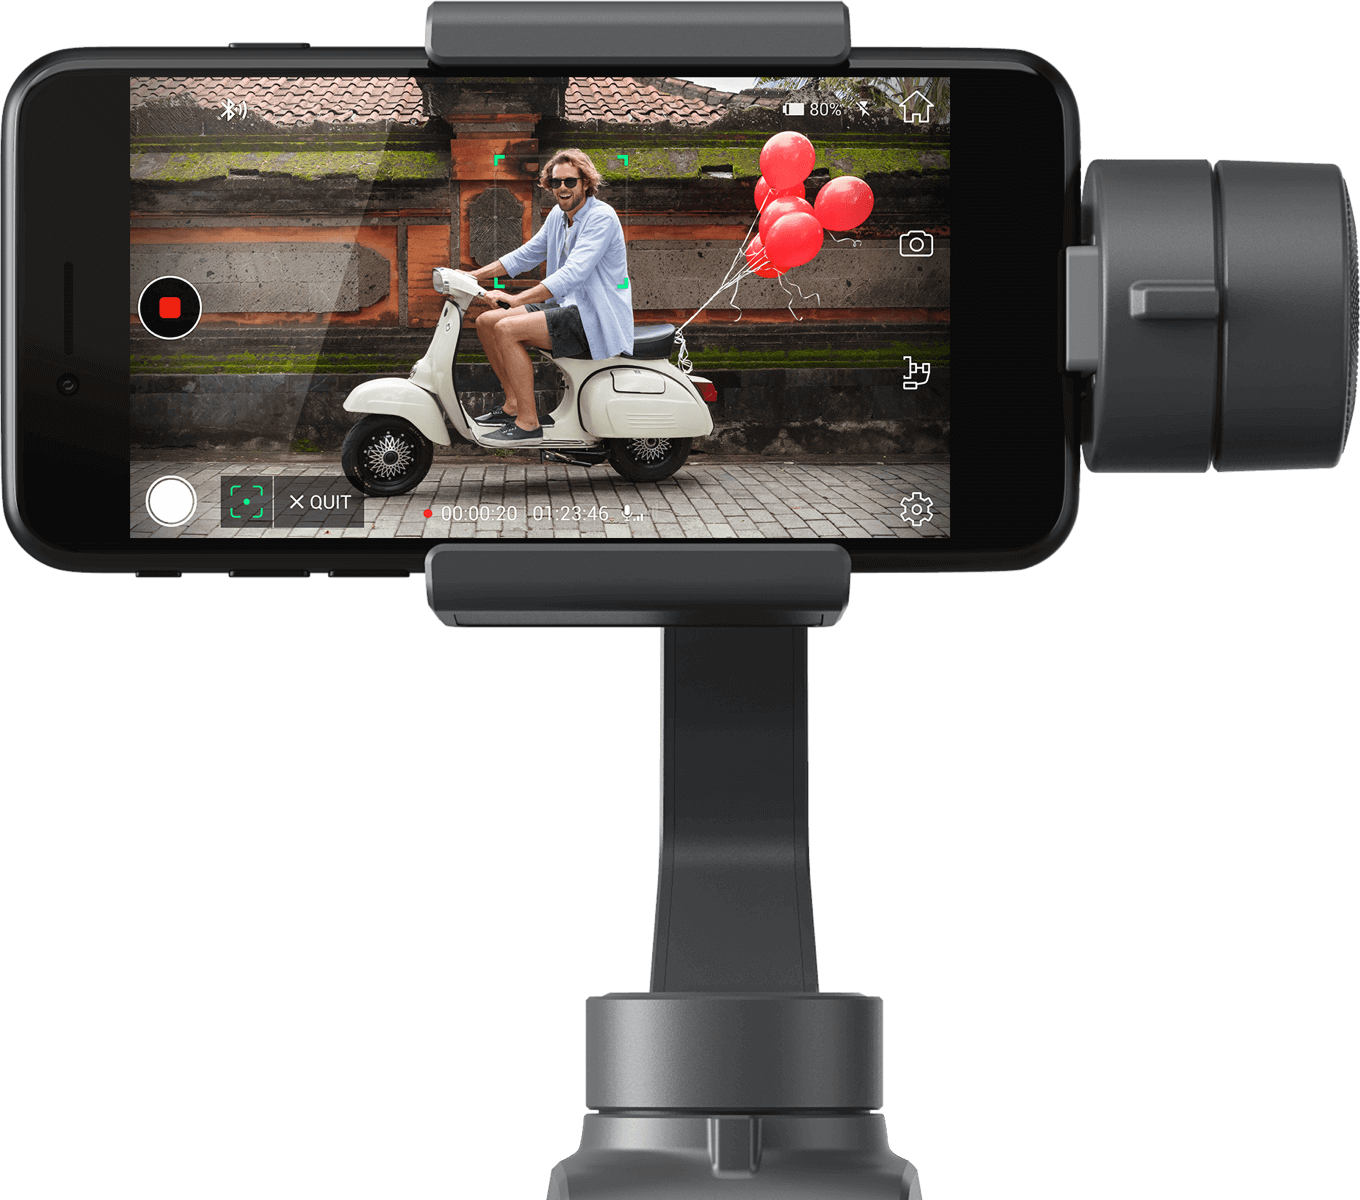 DJI's refreshed smartphone gimbal is now more affordable and has a longer battery life